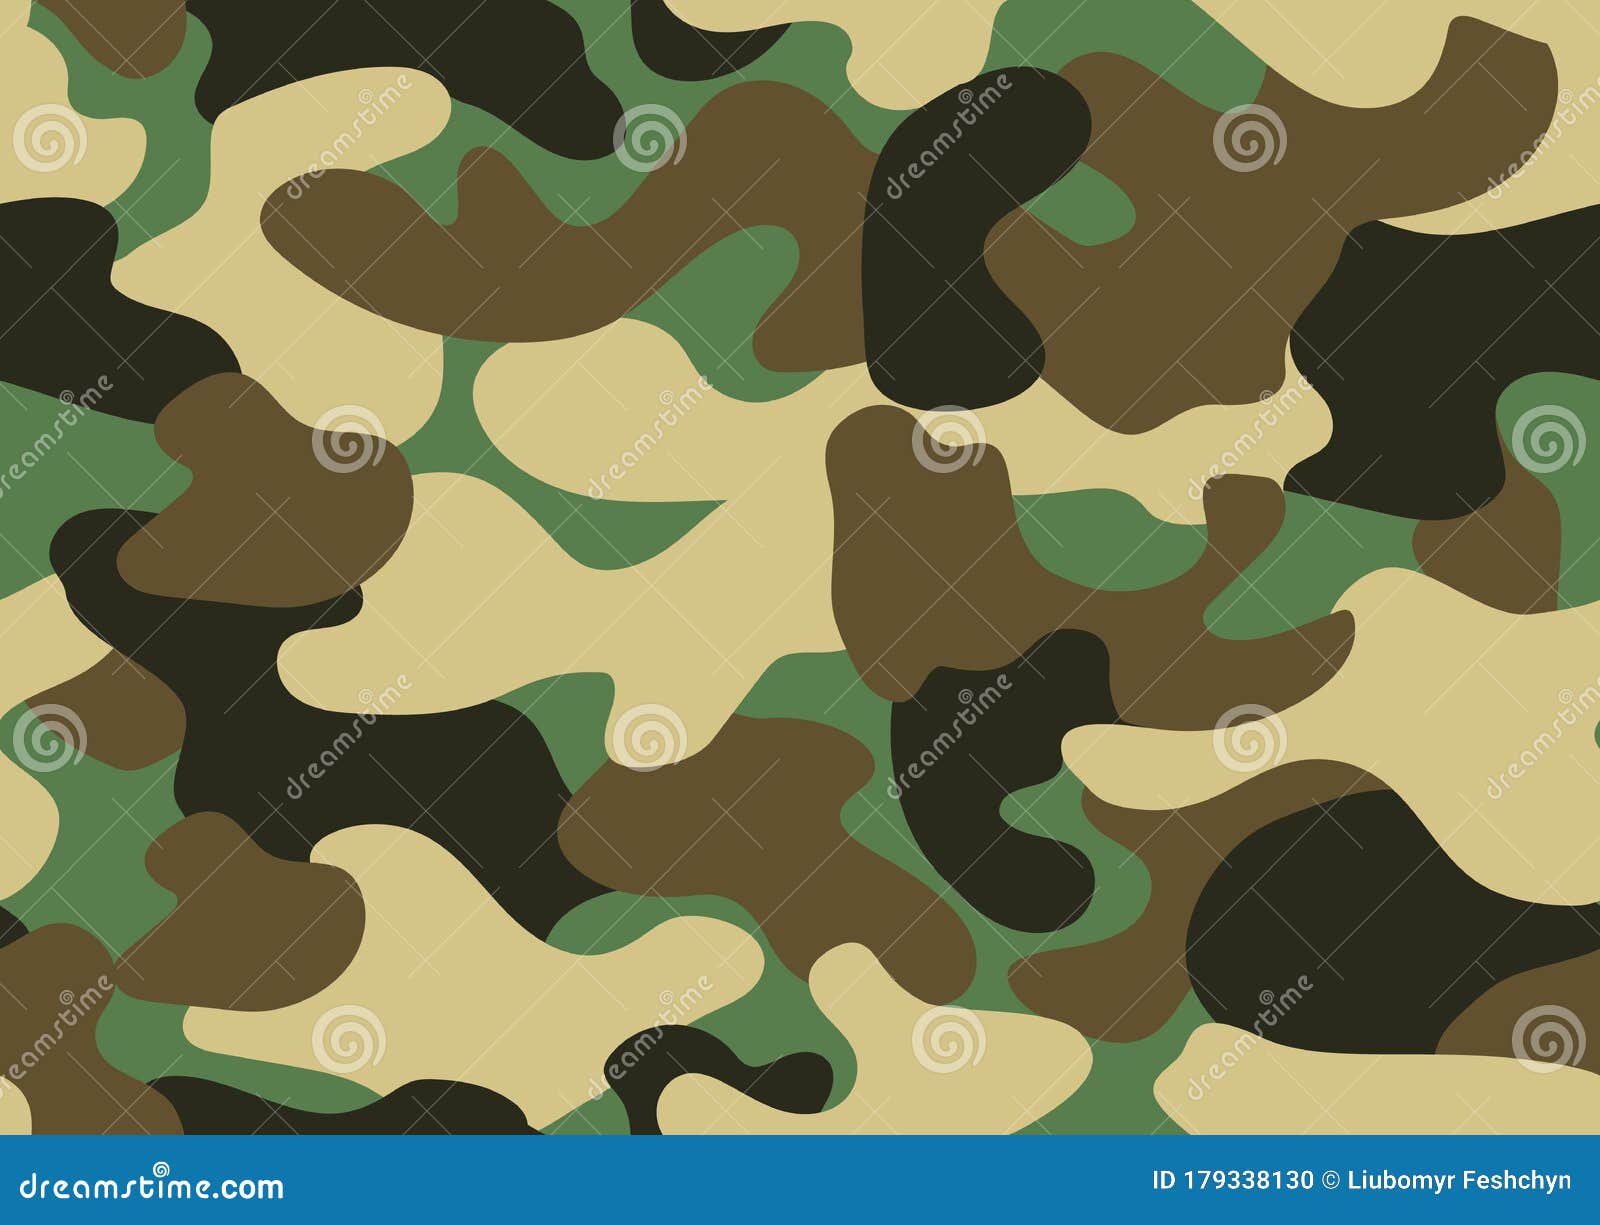 Camouflage Seamless Pattern Abstract Military Or Hunting Camouflage Background Classic Clothing Style Masking Camo Stock Vector Illustration Of Cami Green 179338130